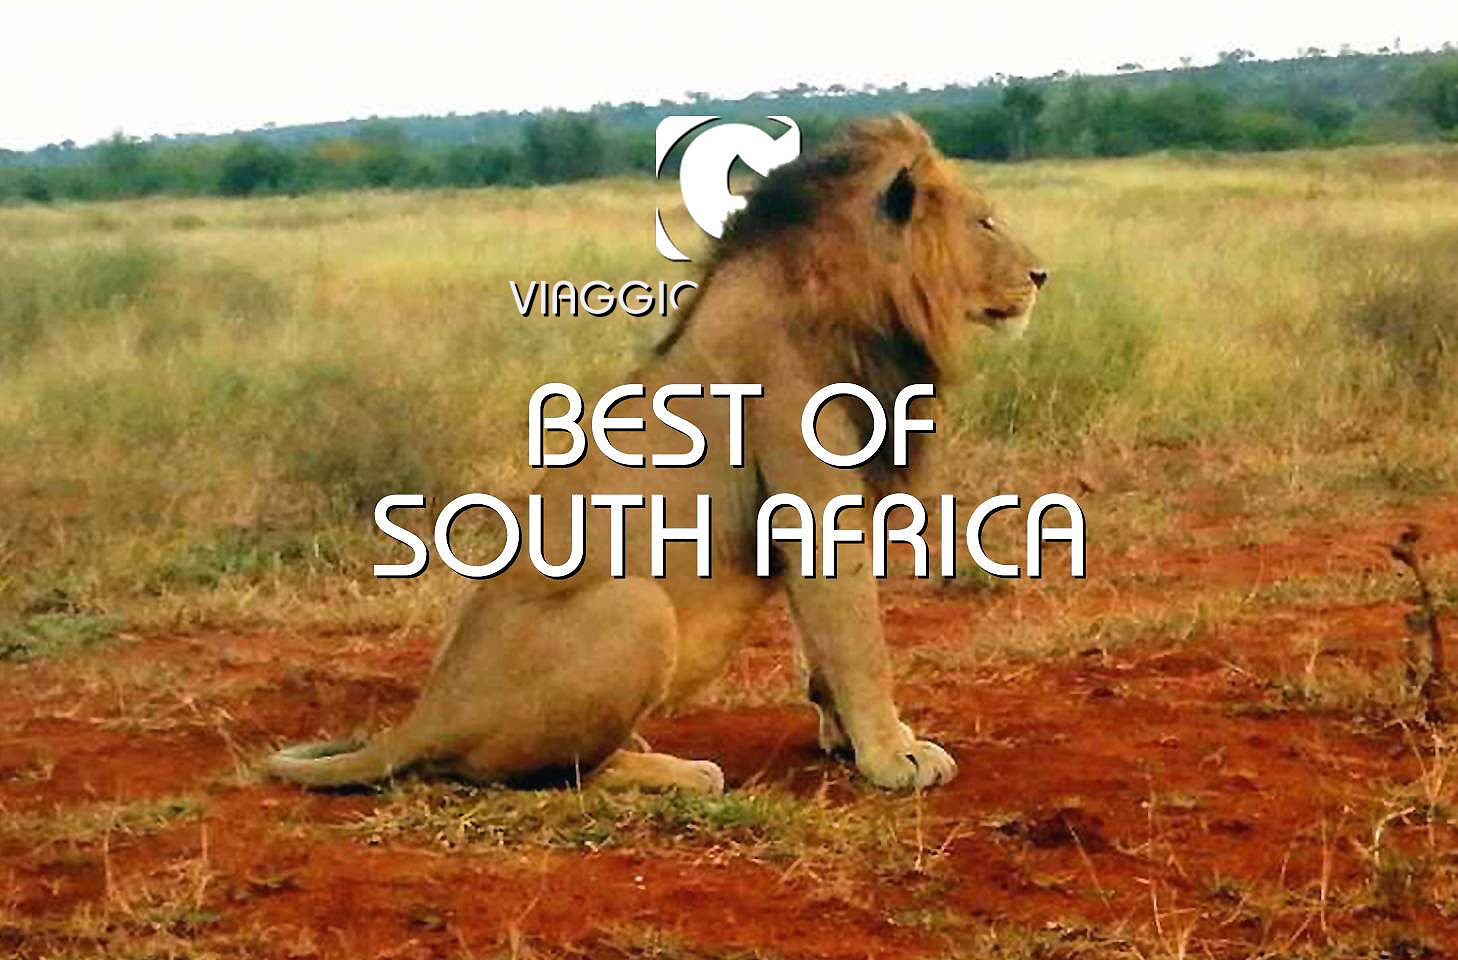 BEST OF SOUTH AFRICA